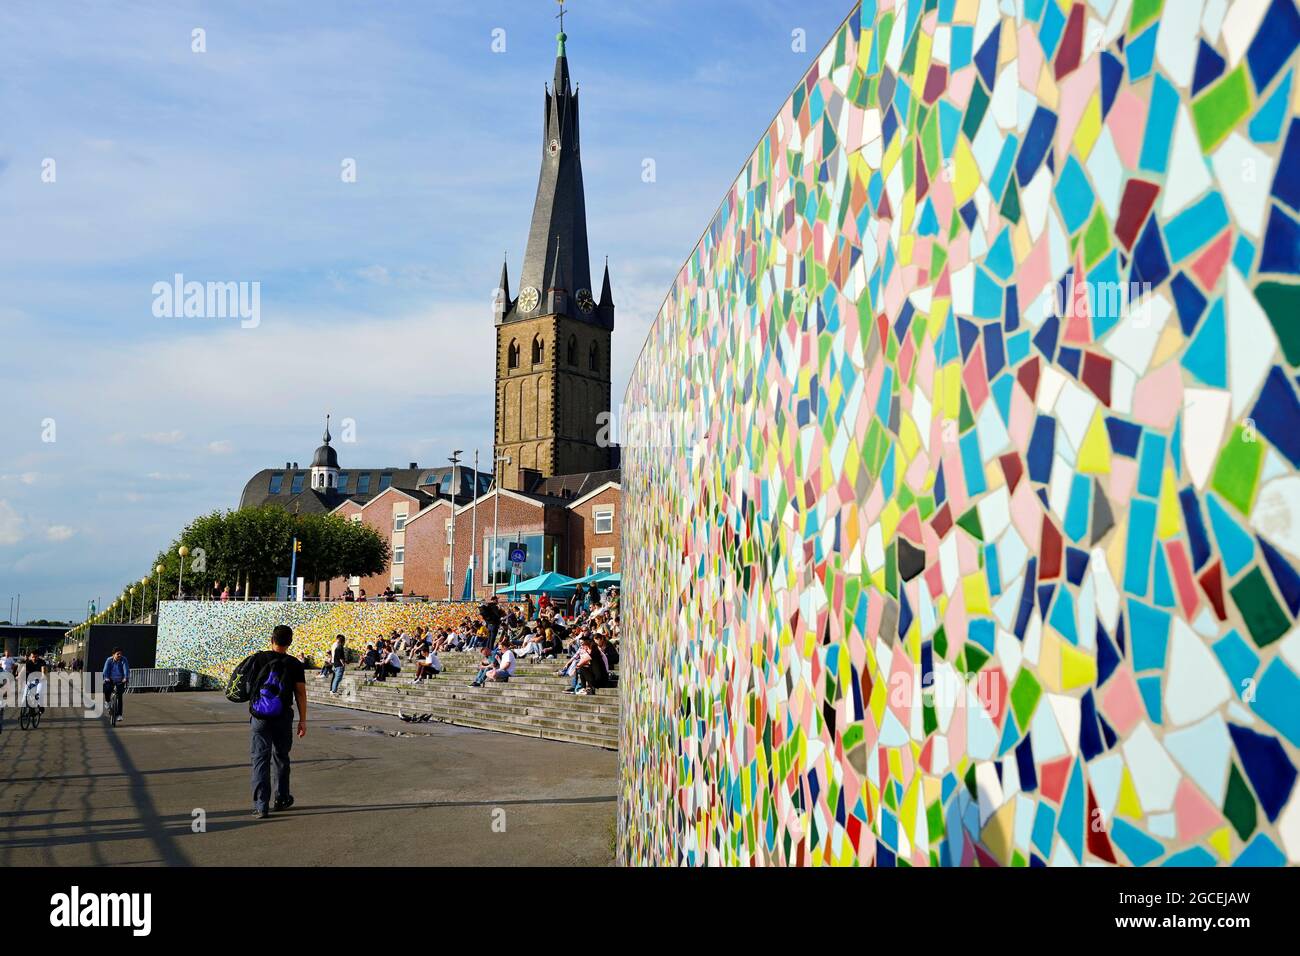 People relaxing on steps at the Rhine river promenade in Düsseldorf, Germany. Colourful 'Rivertime' mosaic wall by Hermann-Josef Kuhna. Stock Photo